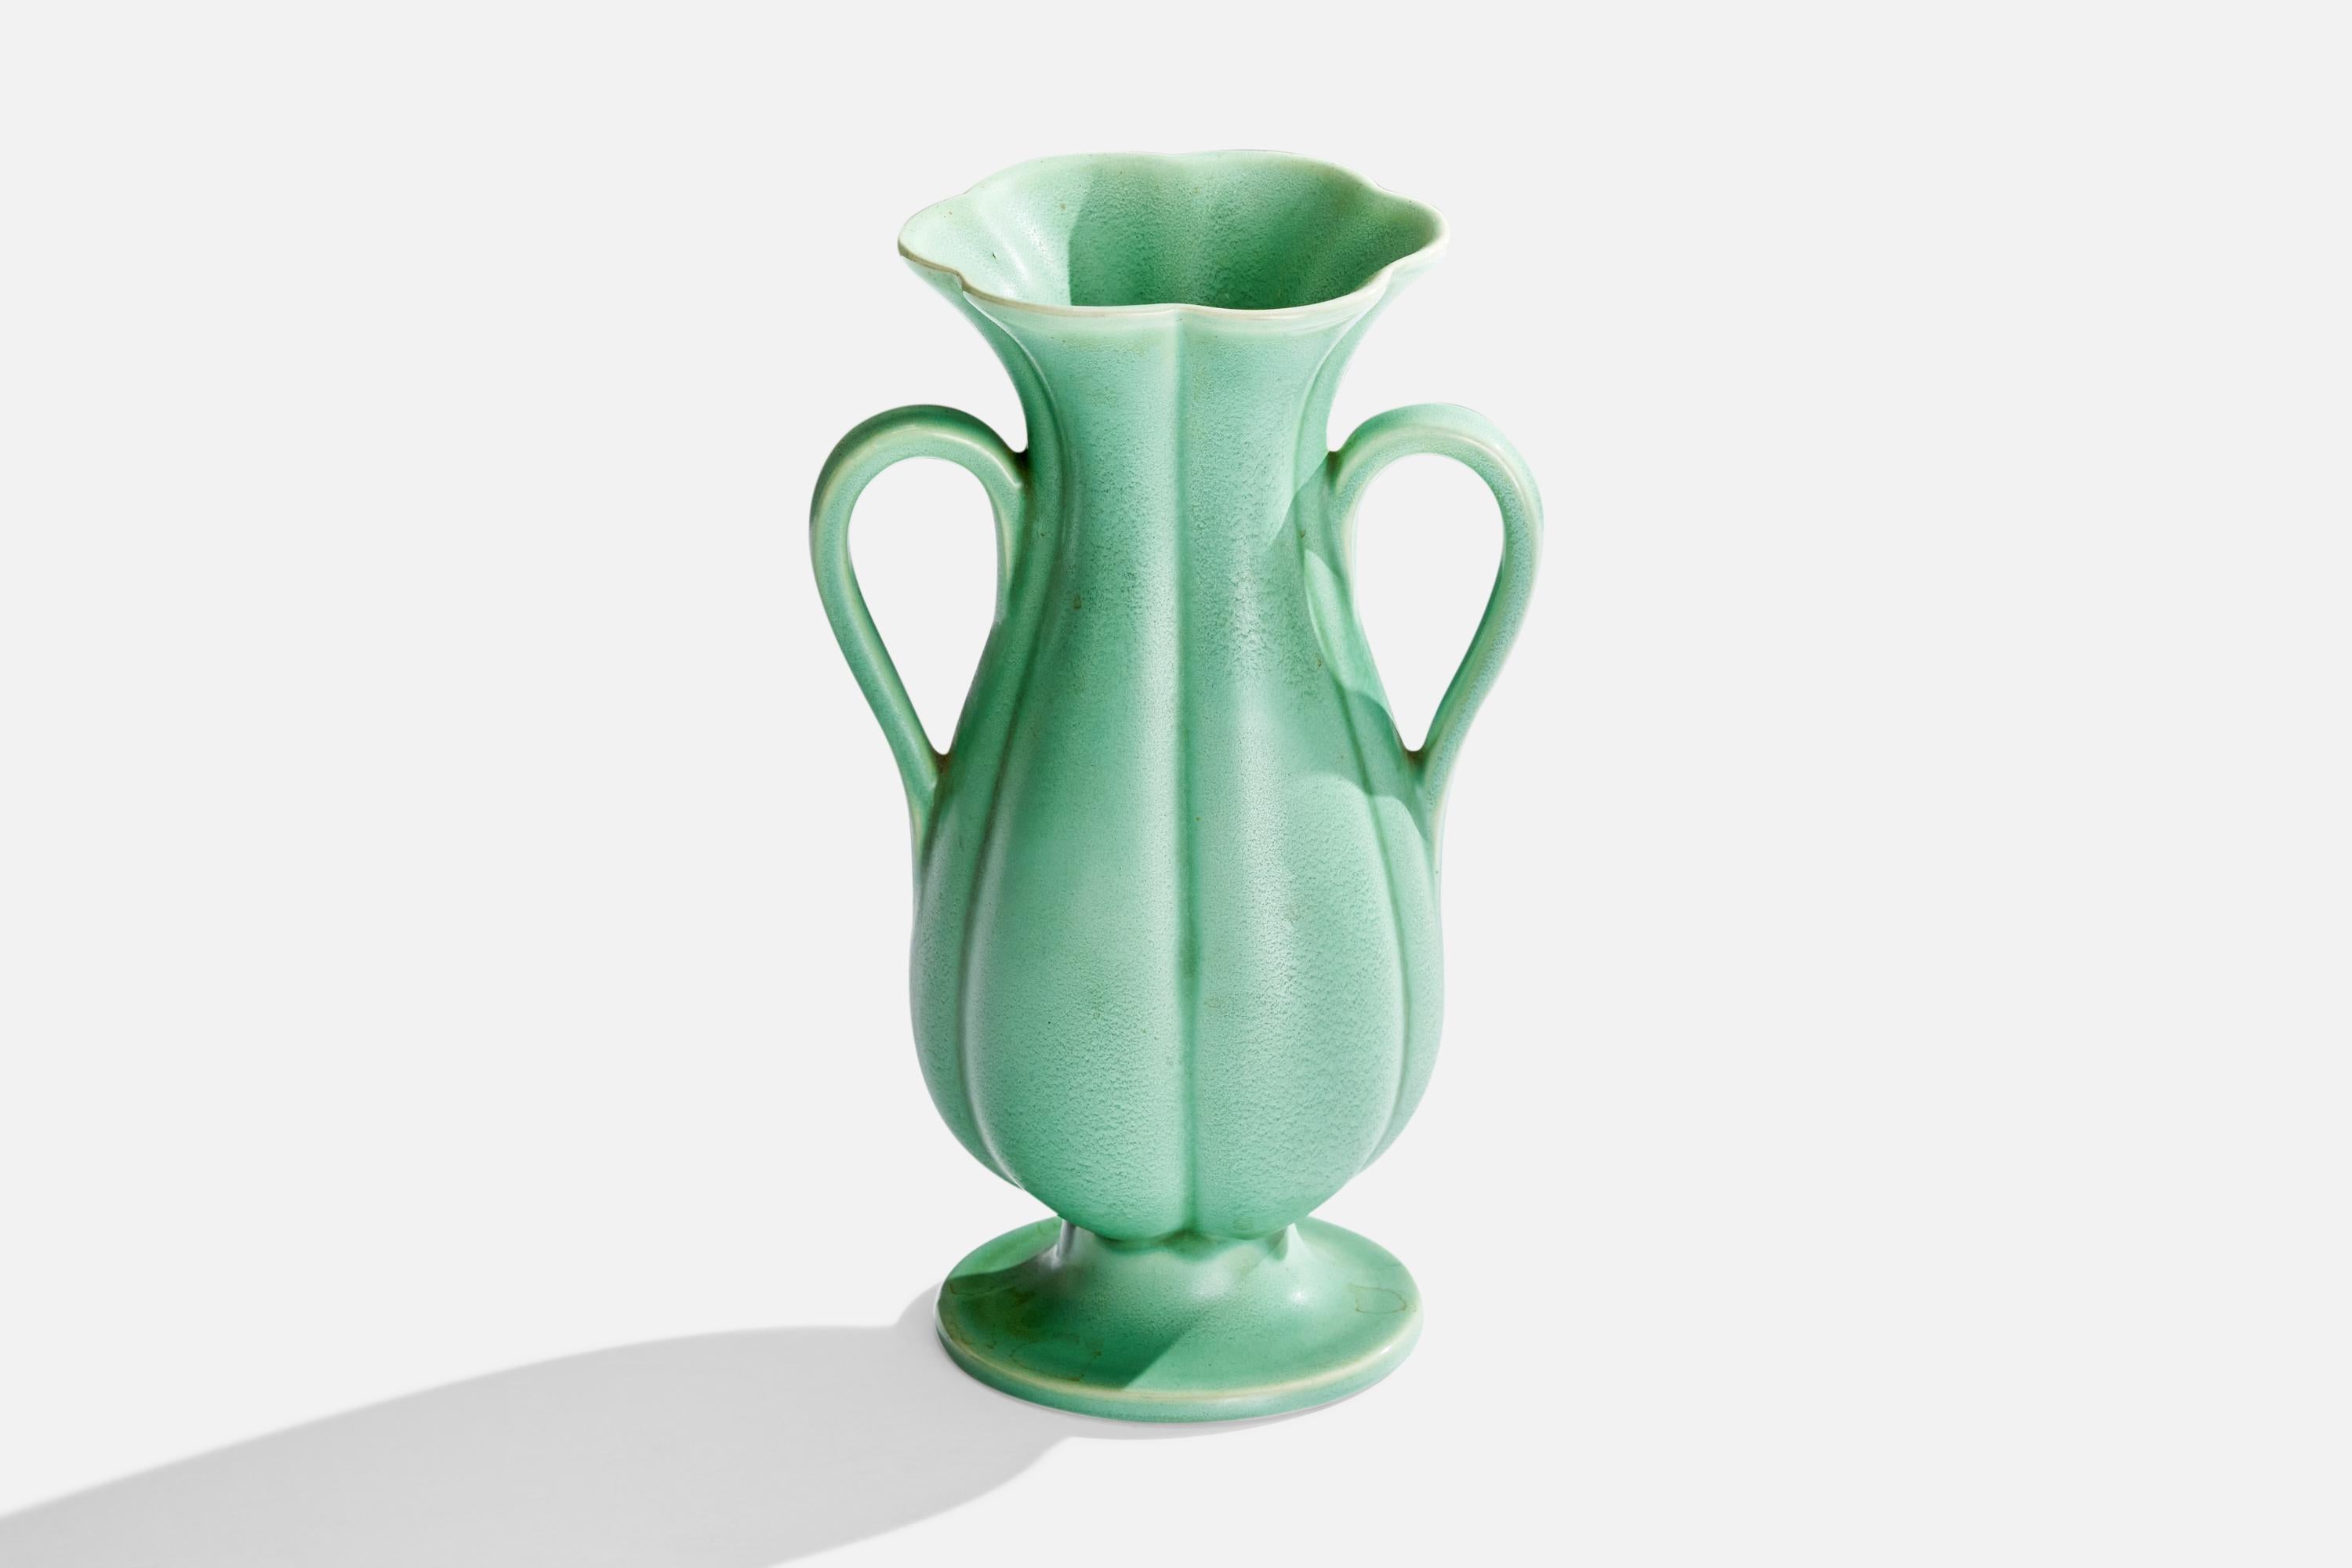 A green-glazed ceramic vase designed by Arthur Percy and produced by Gefle, Sweden, 1930s.